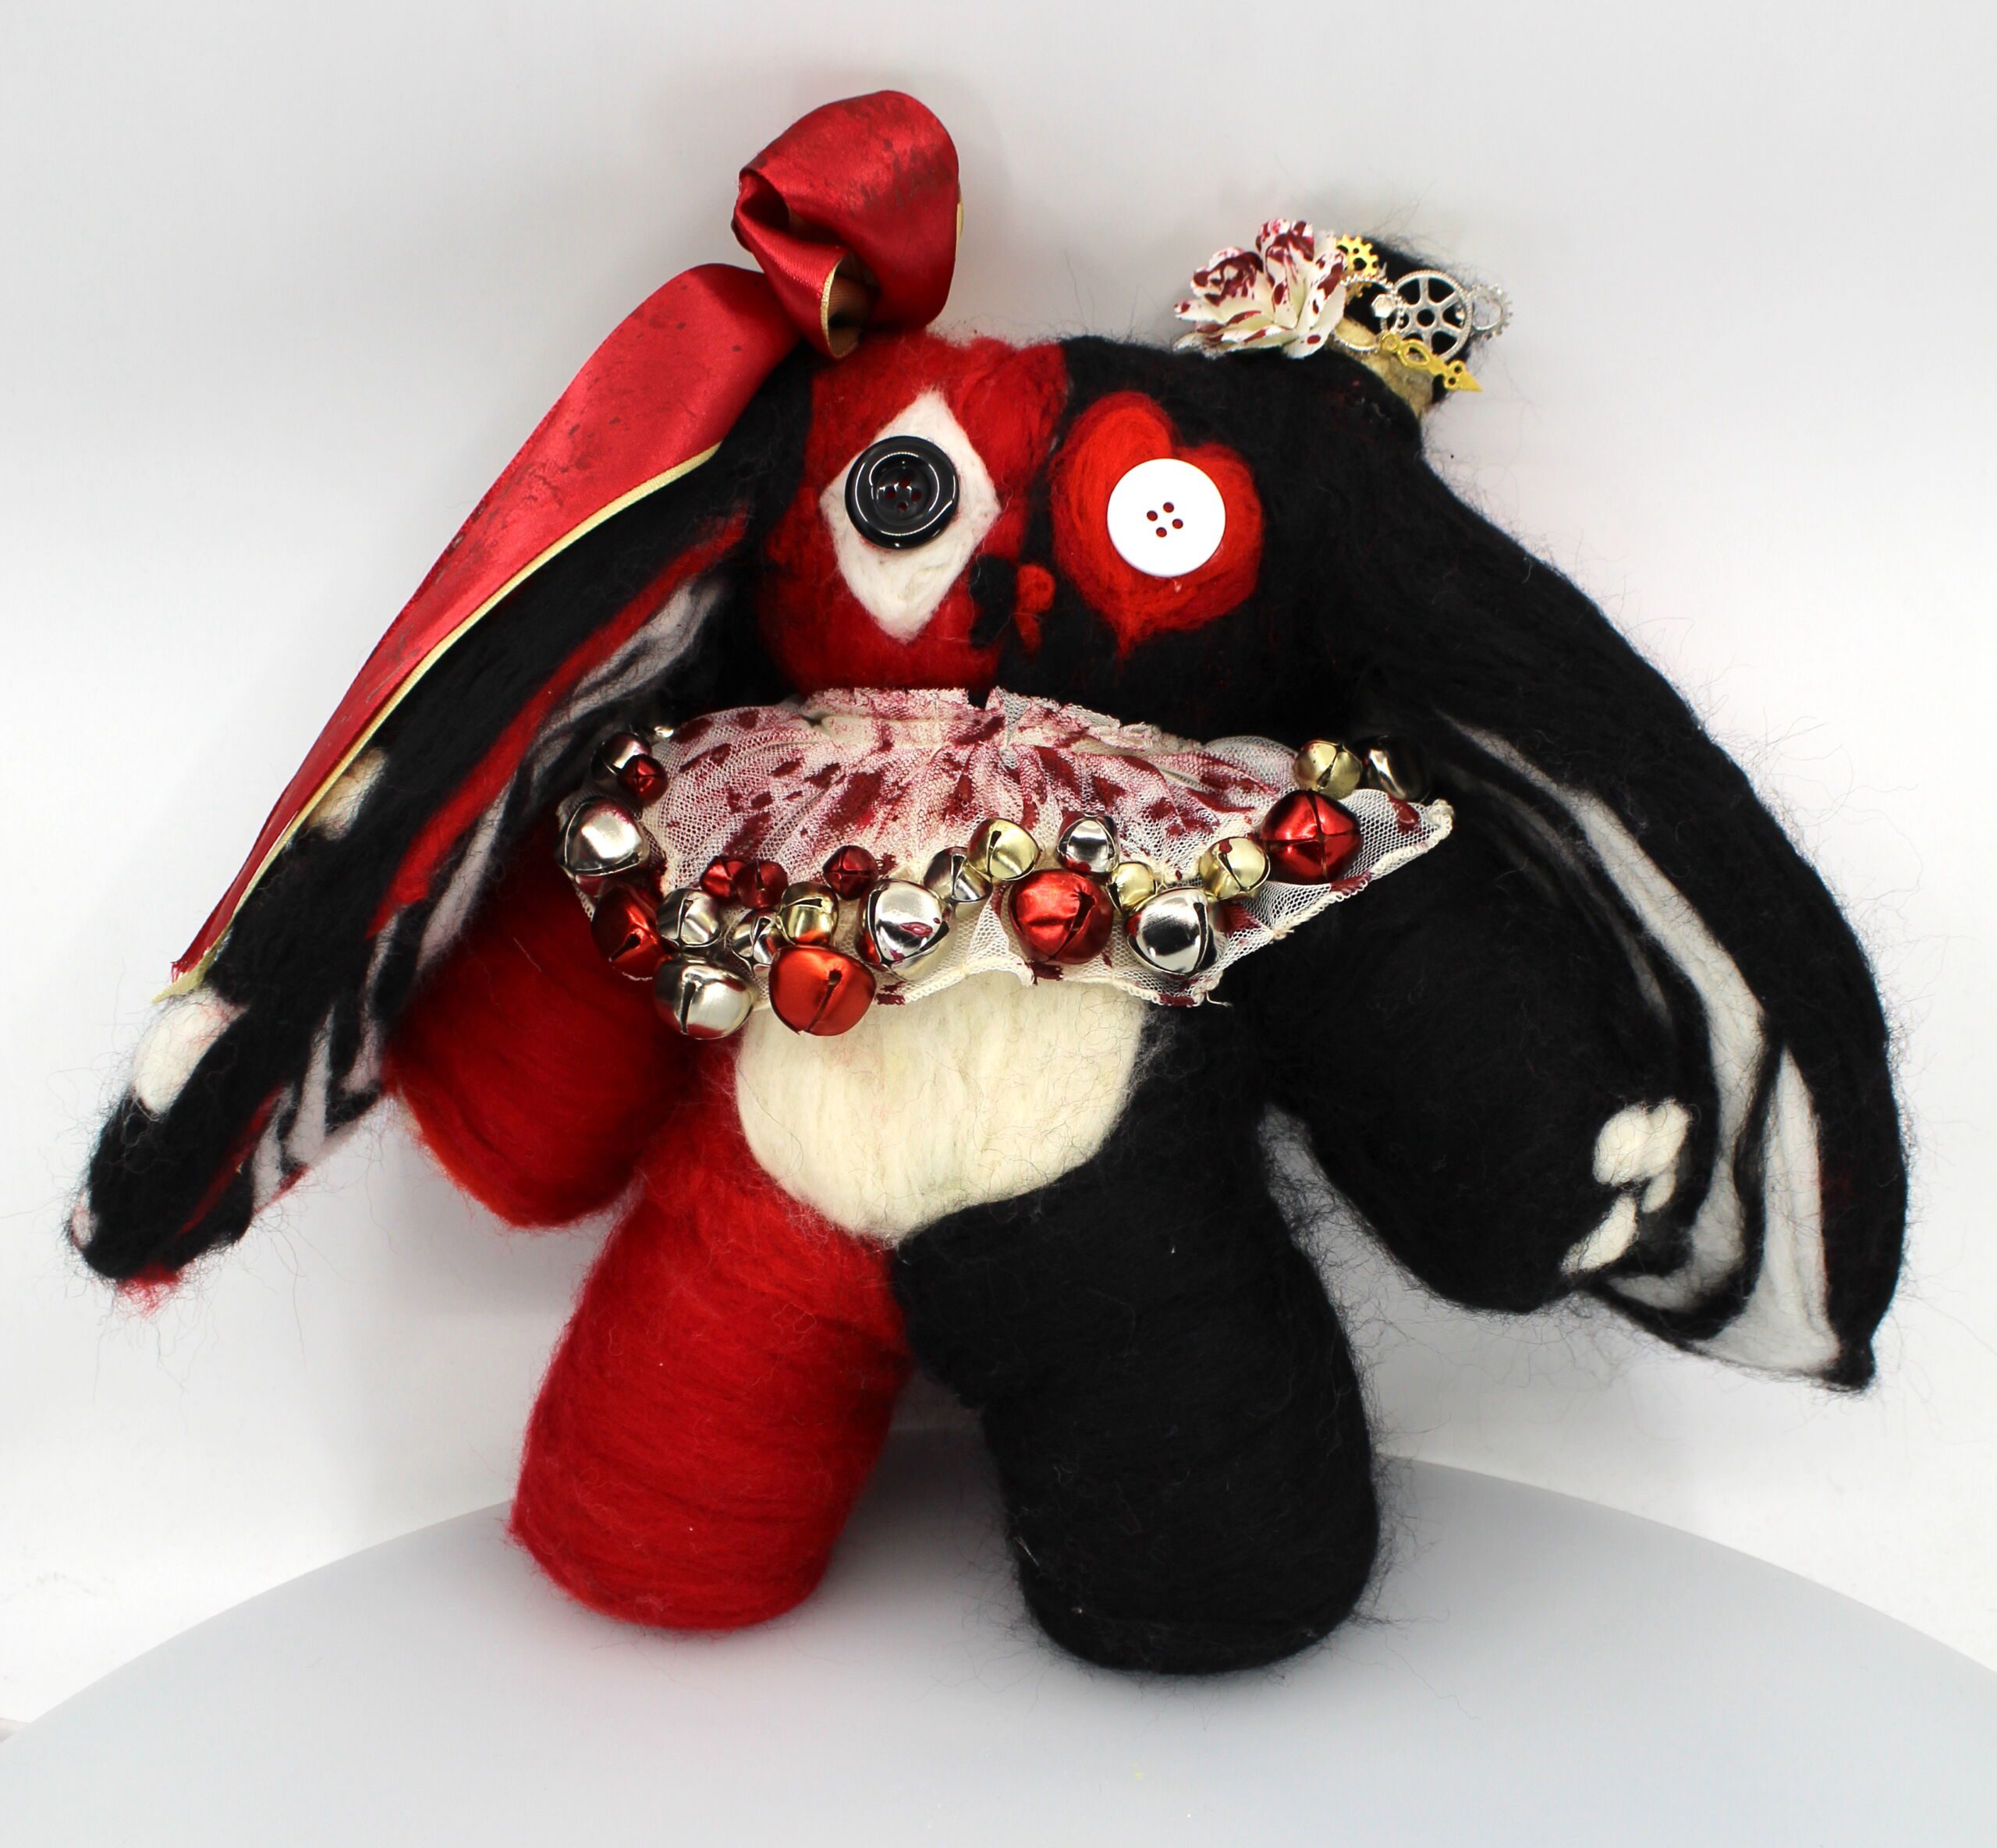 This image shows a needle-felted black, red, and white bunny plushies. The plushie looks like a Queen of Hearts card with a jester collar covered in blood stains and jingle bells. This is an art piece by Jocelyn Olguin, a student at Pritzker College Prep.